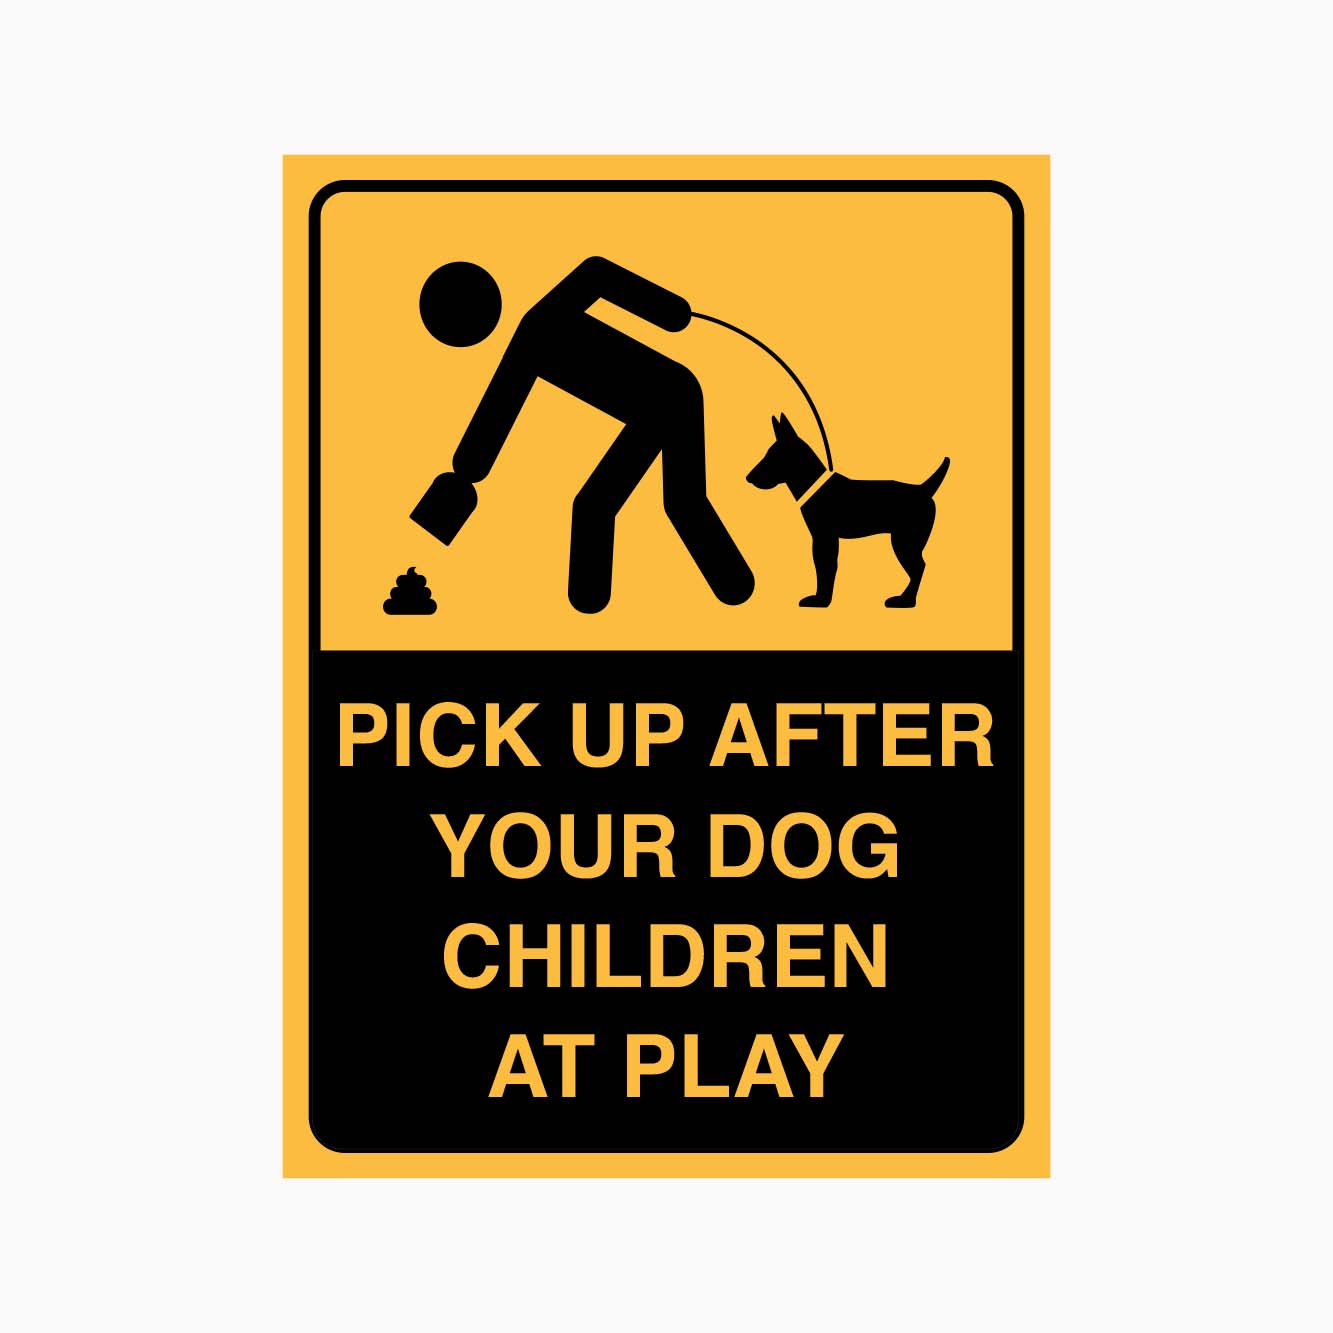 PICK UP AFTER YOUR DOG CHILDREN AT PLAY SIGN - GET SIGNS